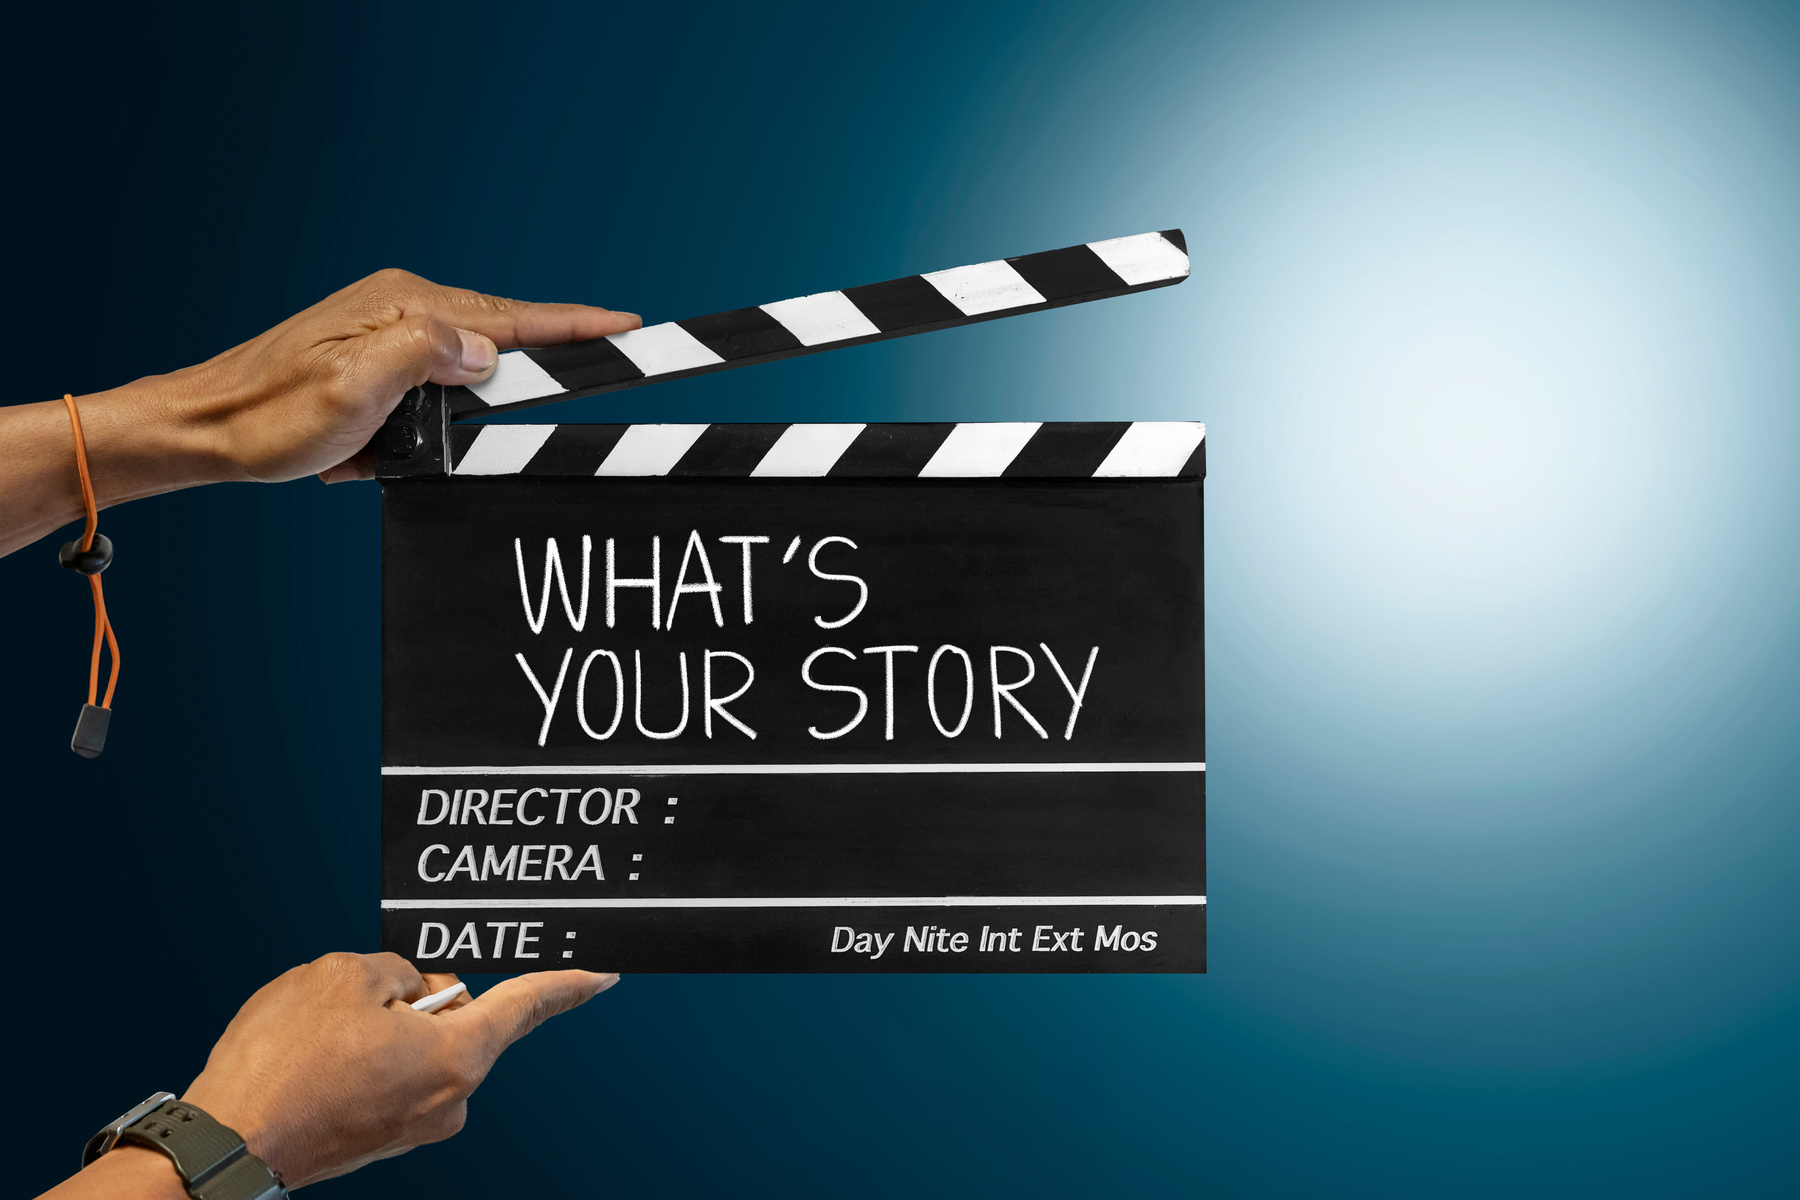 What's your story.Text title on film slate for film maker.storytelling concept.